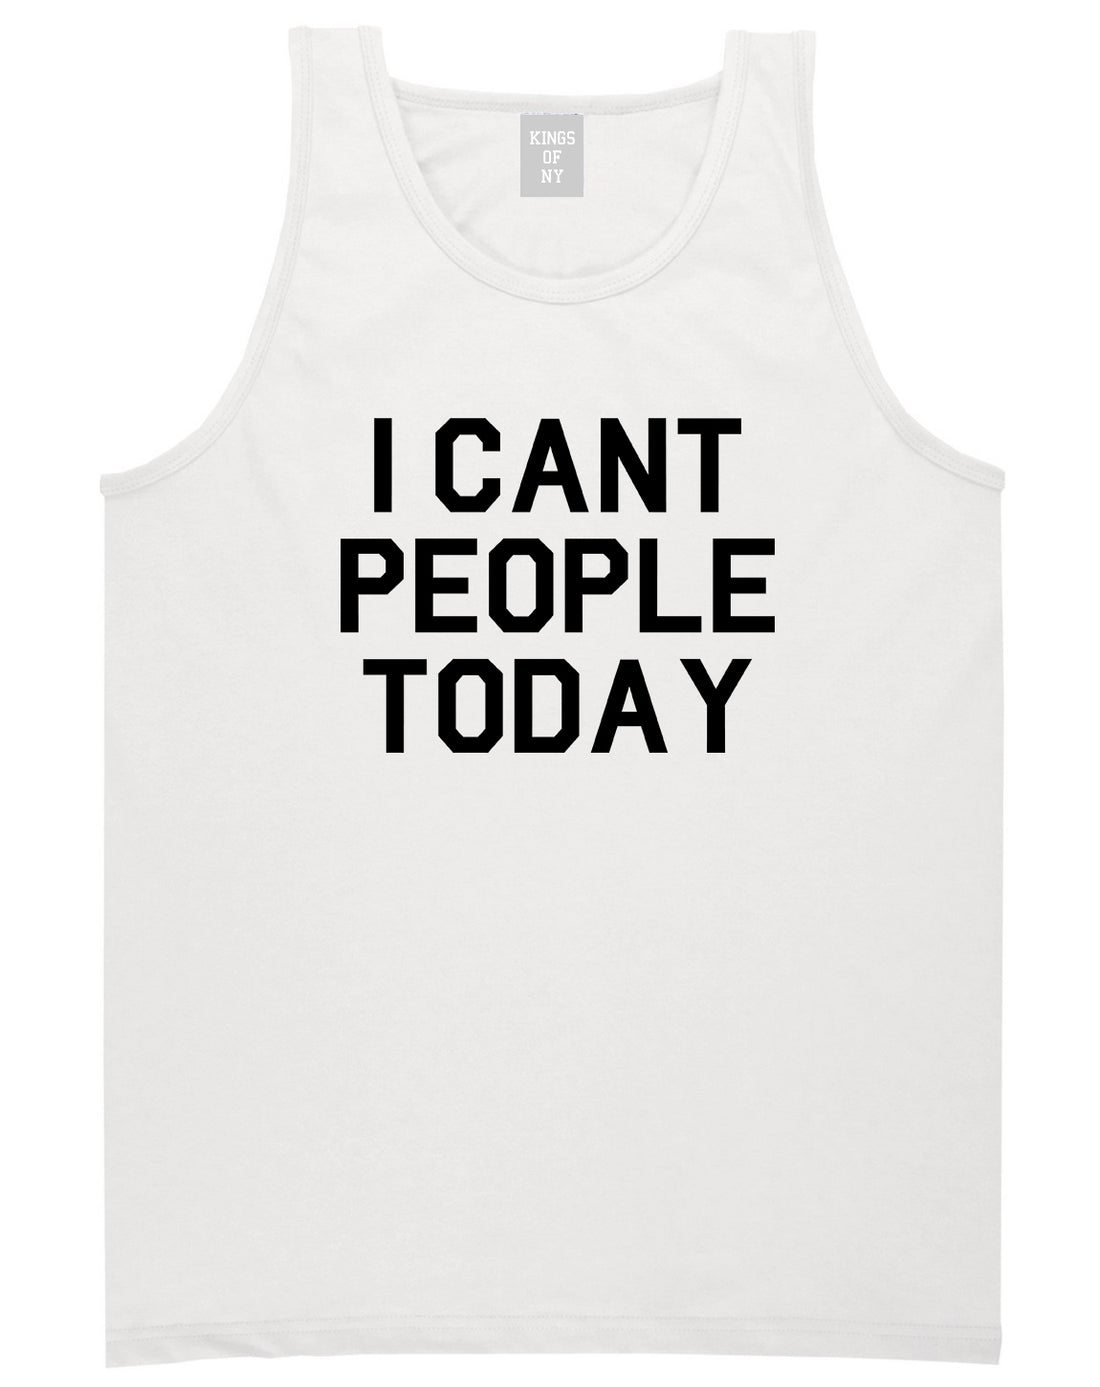 I Cant People Today Funny Mens Tank Top Shirt White